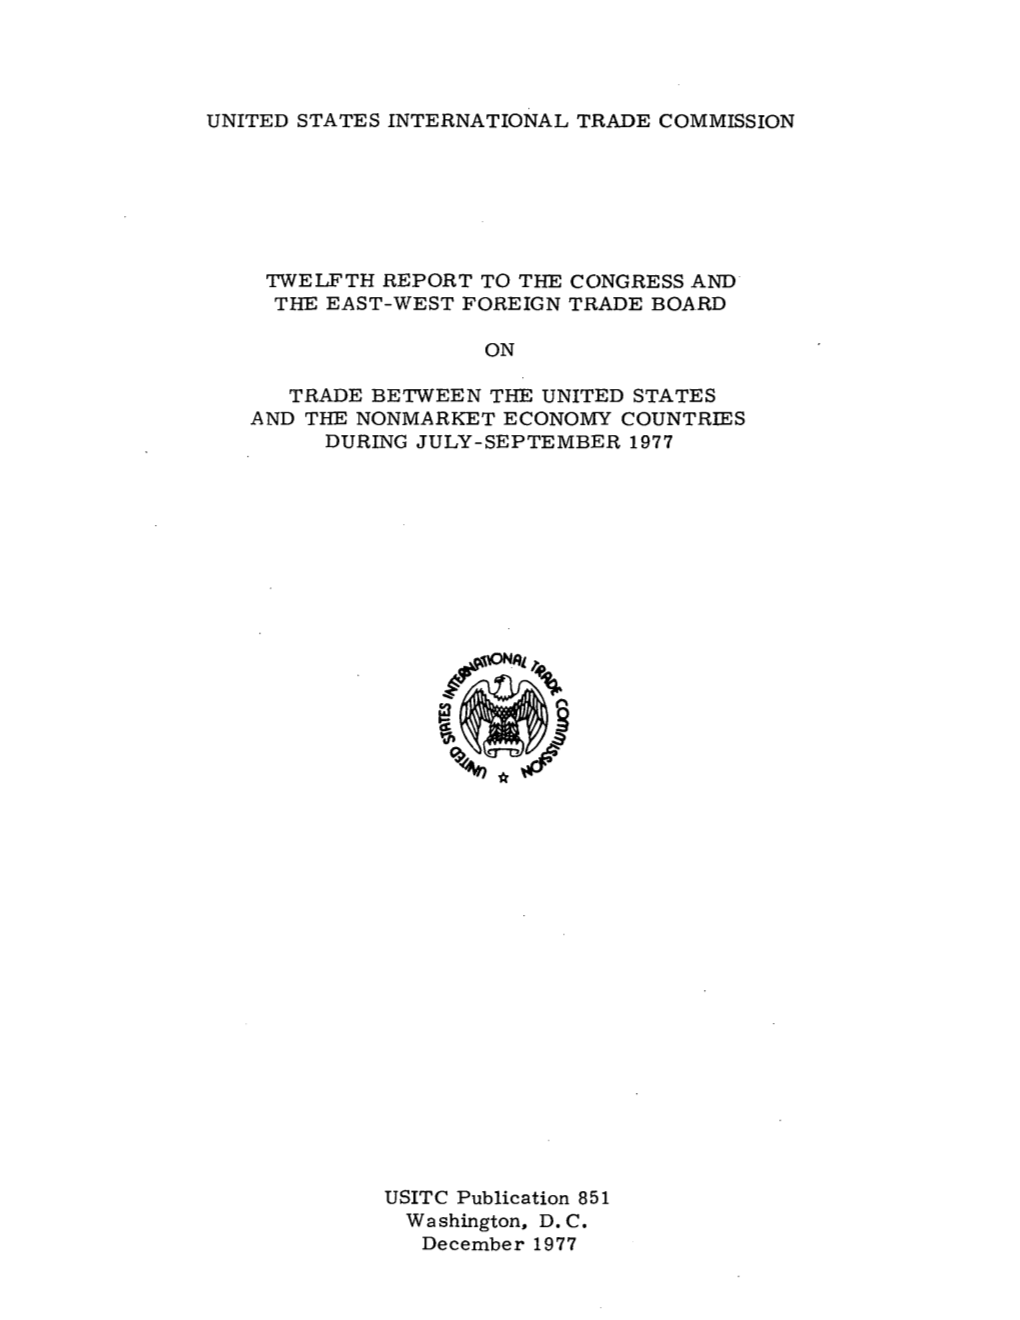 Twelfth Report to the Congress and the East-West Foreign Trade Board